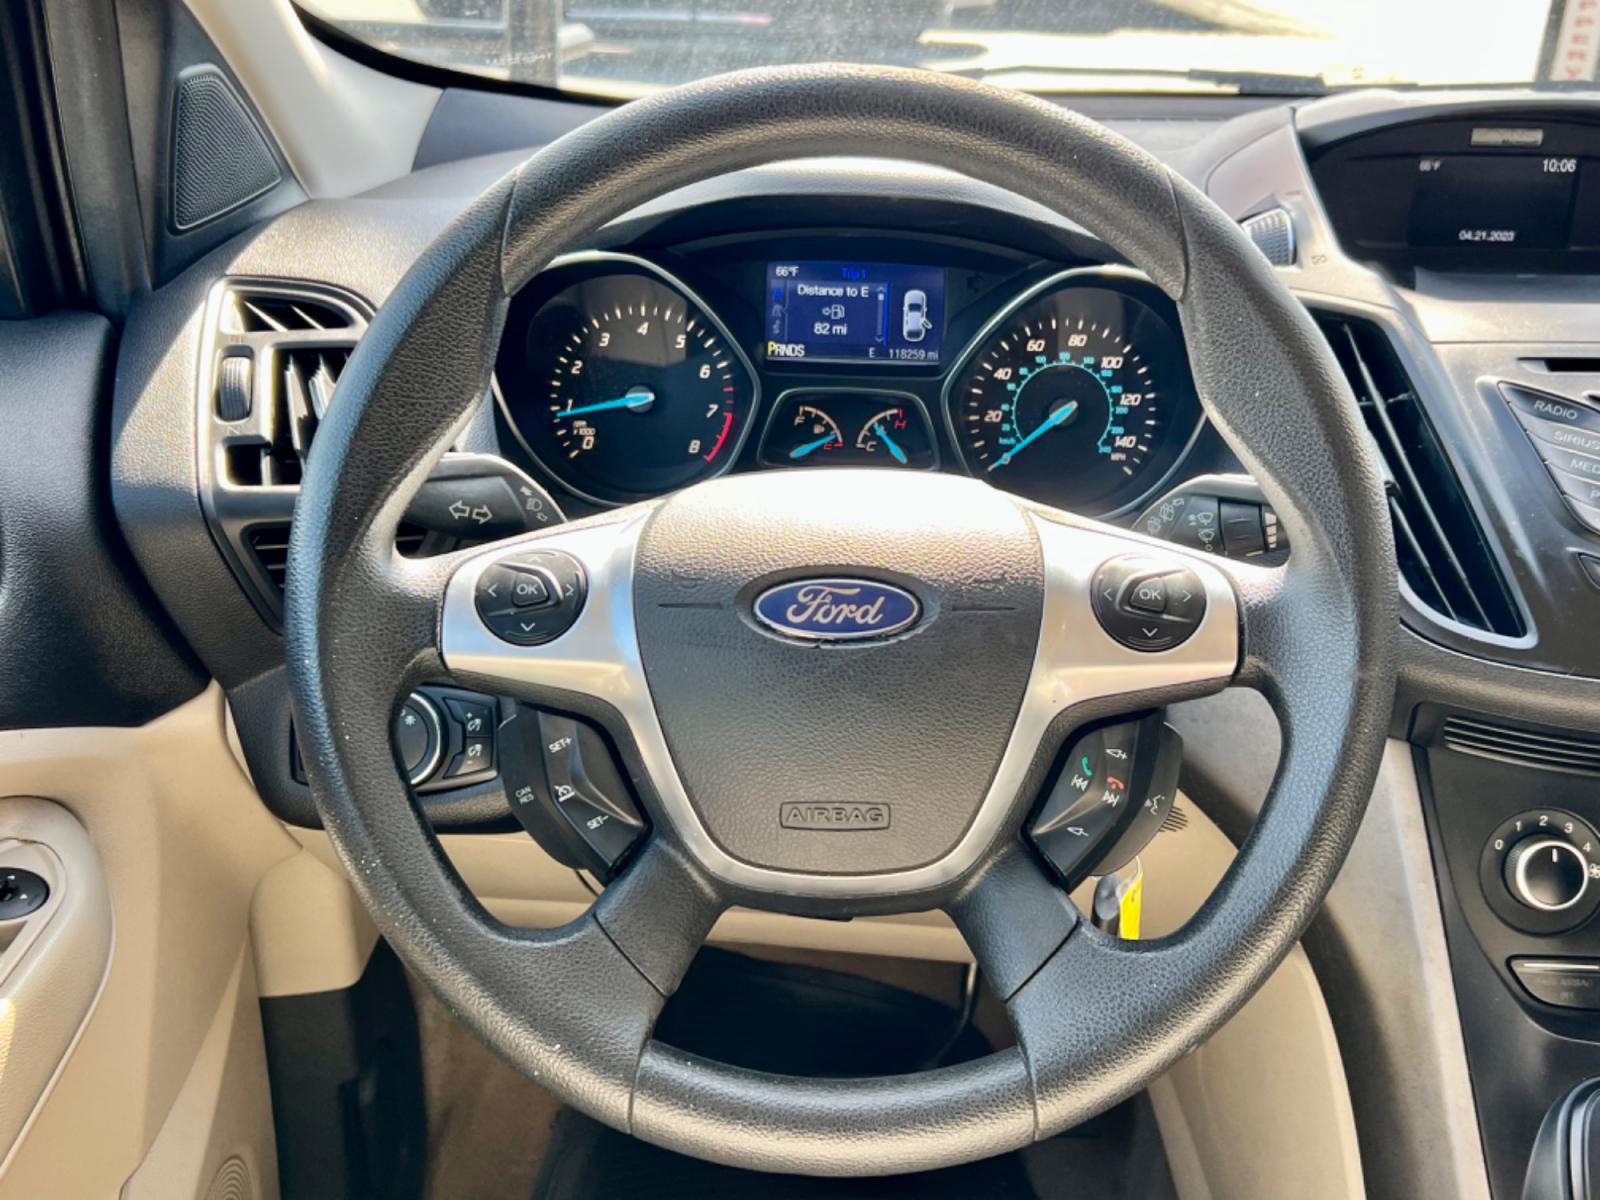 2014 WHITE FORD ESCAPE (1FMCU9GX7EU) , located at 5900 E. Lancaster Ave., Fort Worth, TX, 76112, (817) 457-5456, 0.000000, 0.000000 - This is a 2014 FORD ESCAPE SPORT UTILITY 4-DR that is in excellent condition. There are no dents or scratches. The interior is clean with no rips or tears or stains. All power windows, door locks and seats. Ice cold AC for those hot Texas summer days. It is equipped with a CD player, AM/FM radio, AU - Photo #20